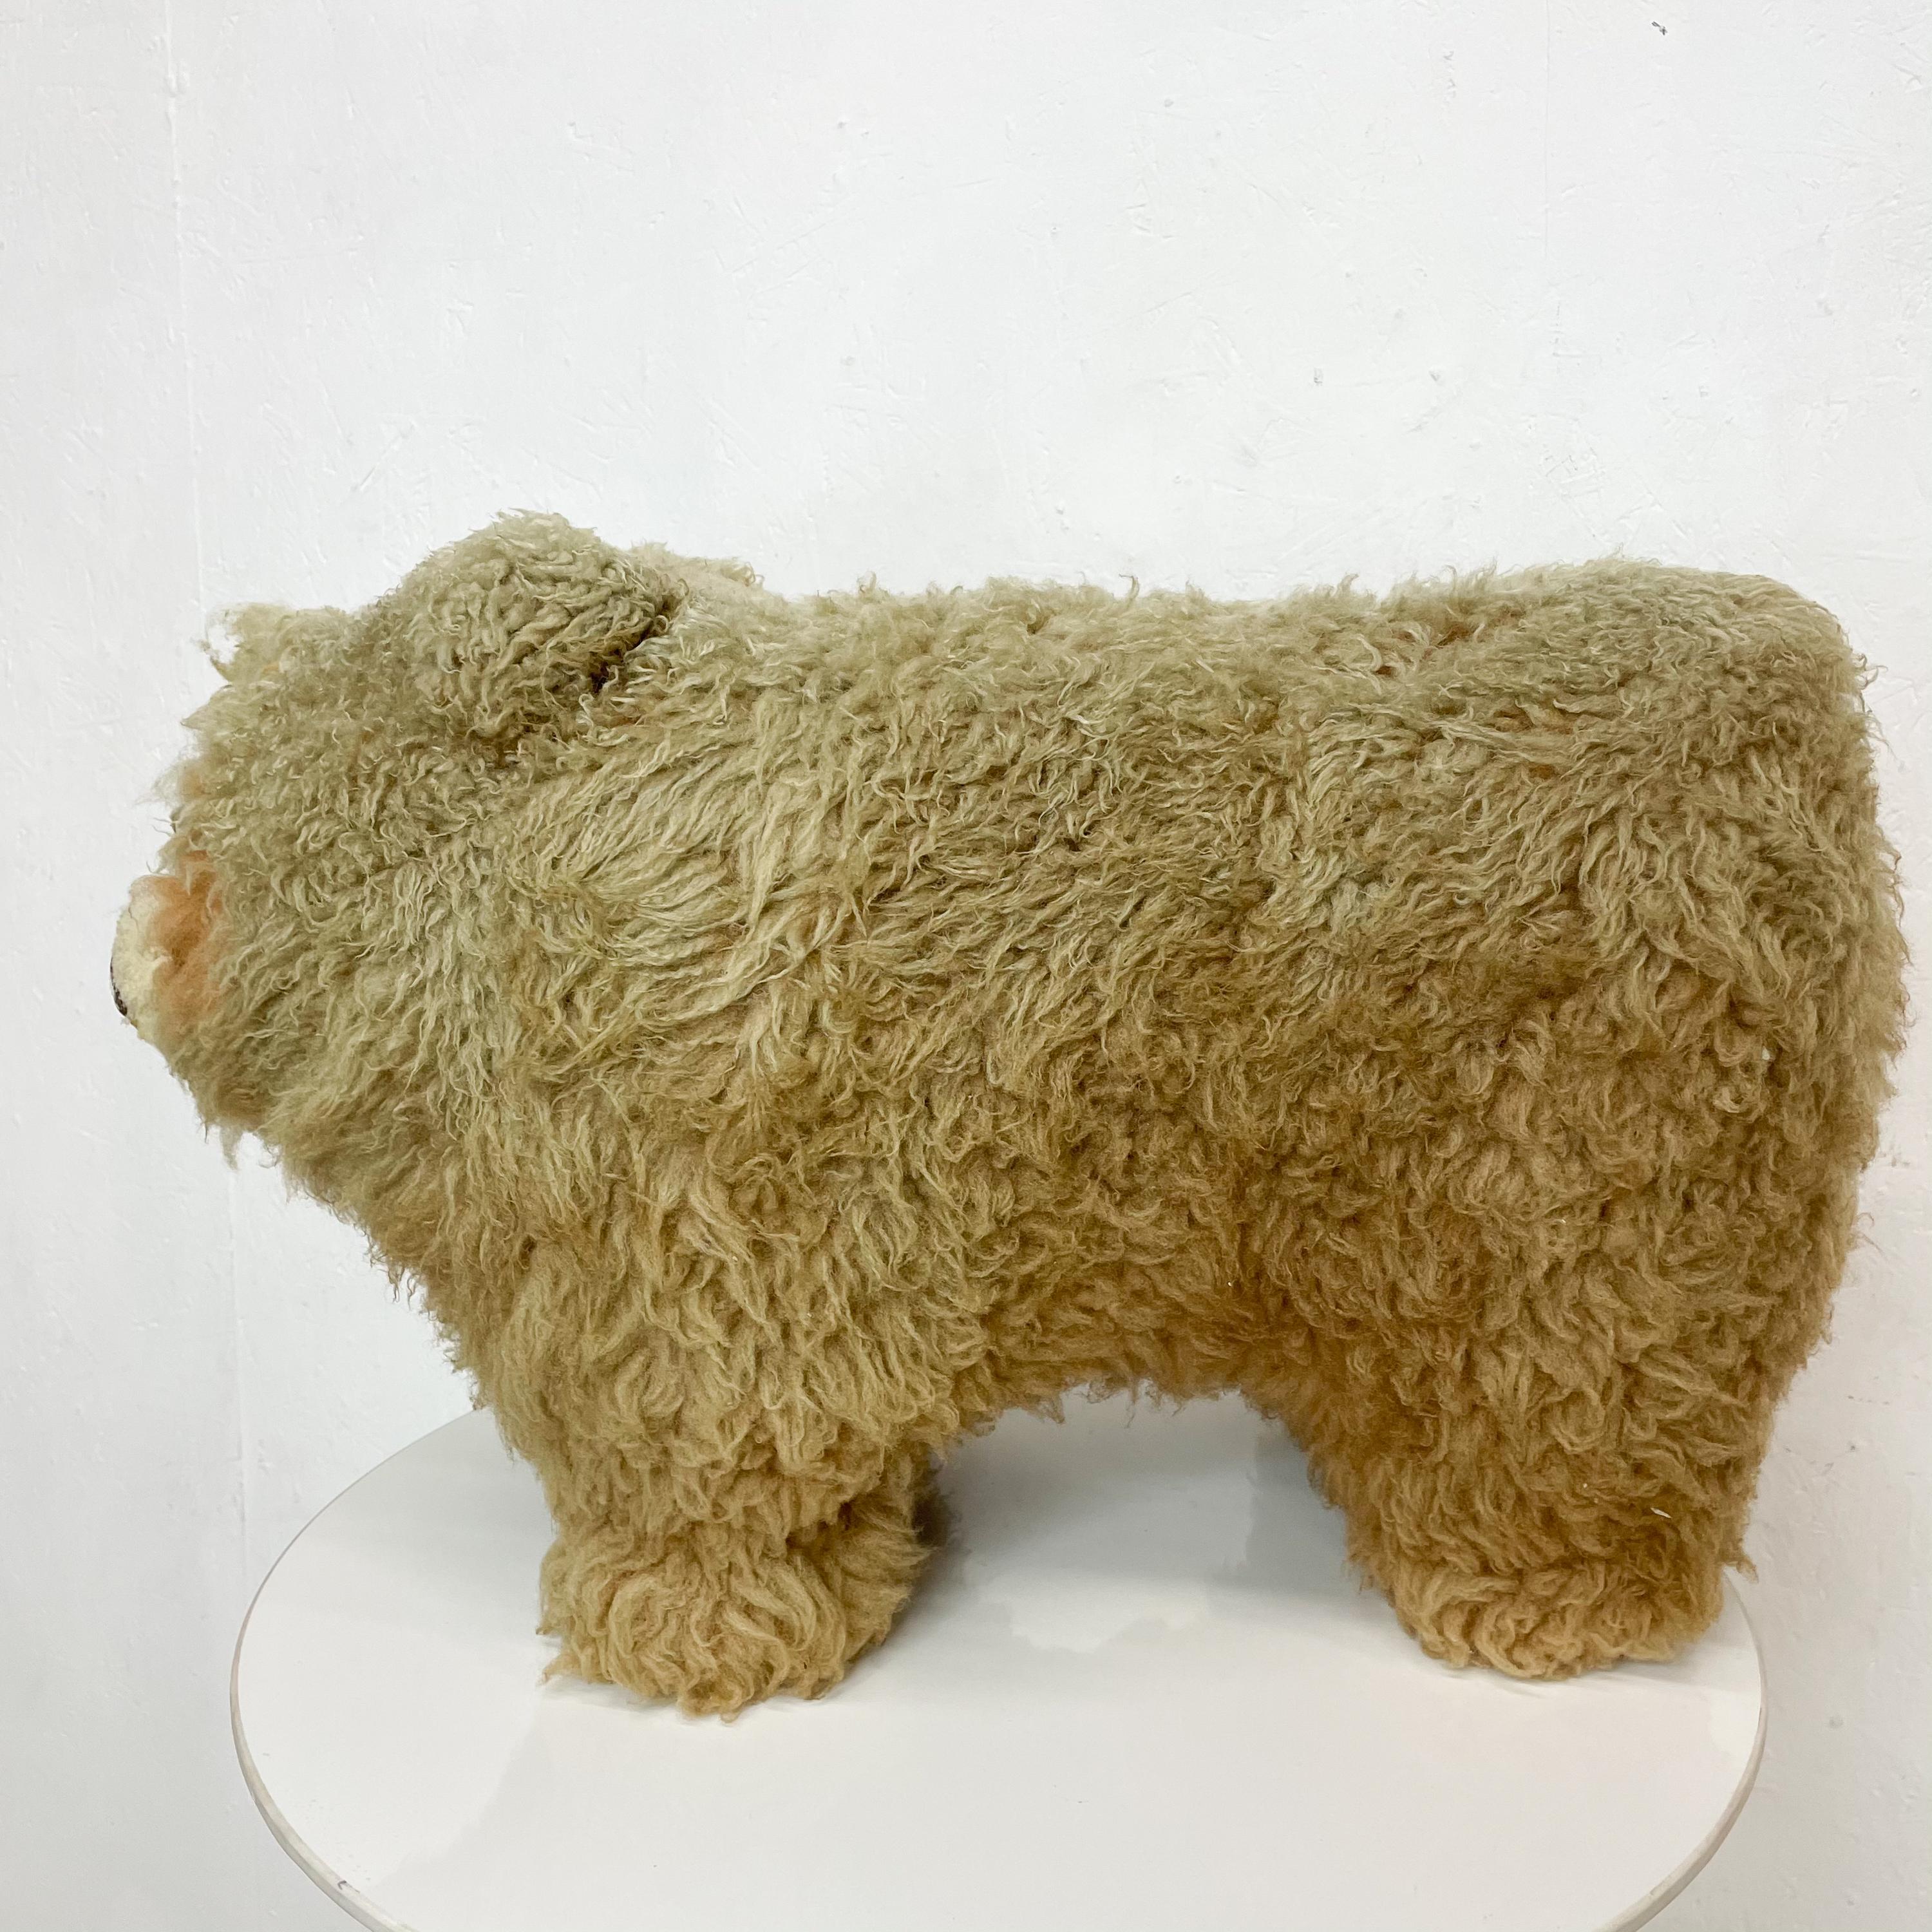 For you: Vintage scully & scully luxury too cute bear foot stool ottoman.
Soft warm Australian lambs wool on solid wood frame. Leather nose. Feet covered with leather protectors.
Park Avenue New York. Handmade in America. Sturdy quality piece.